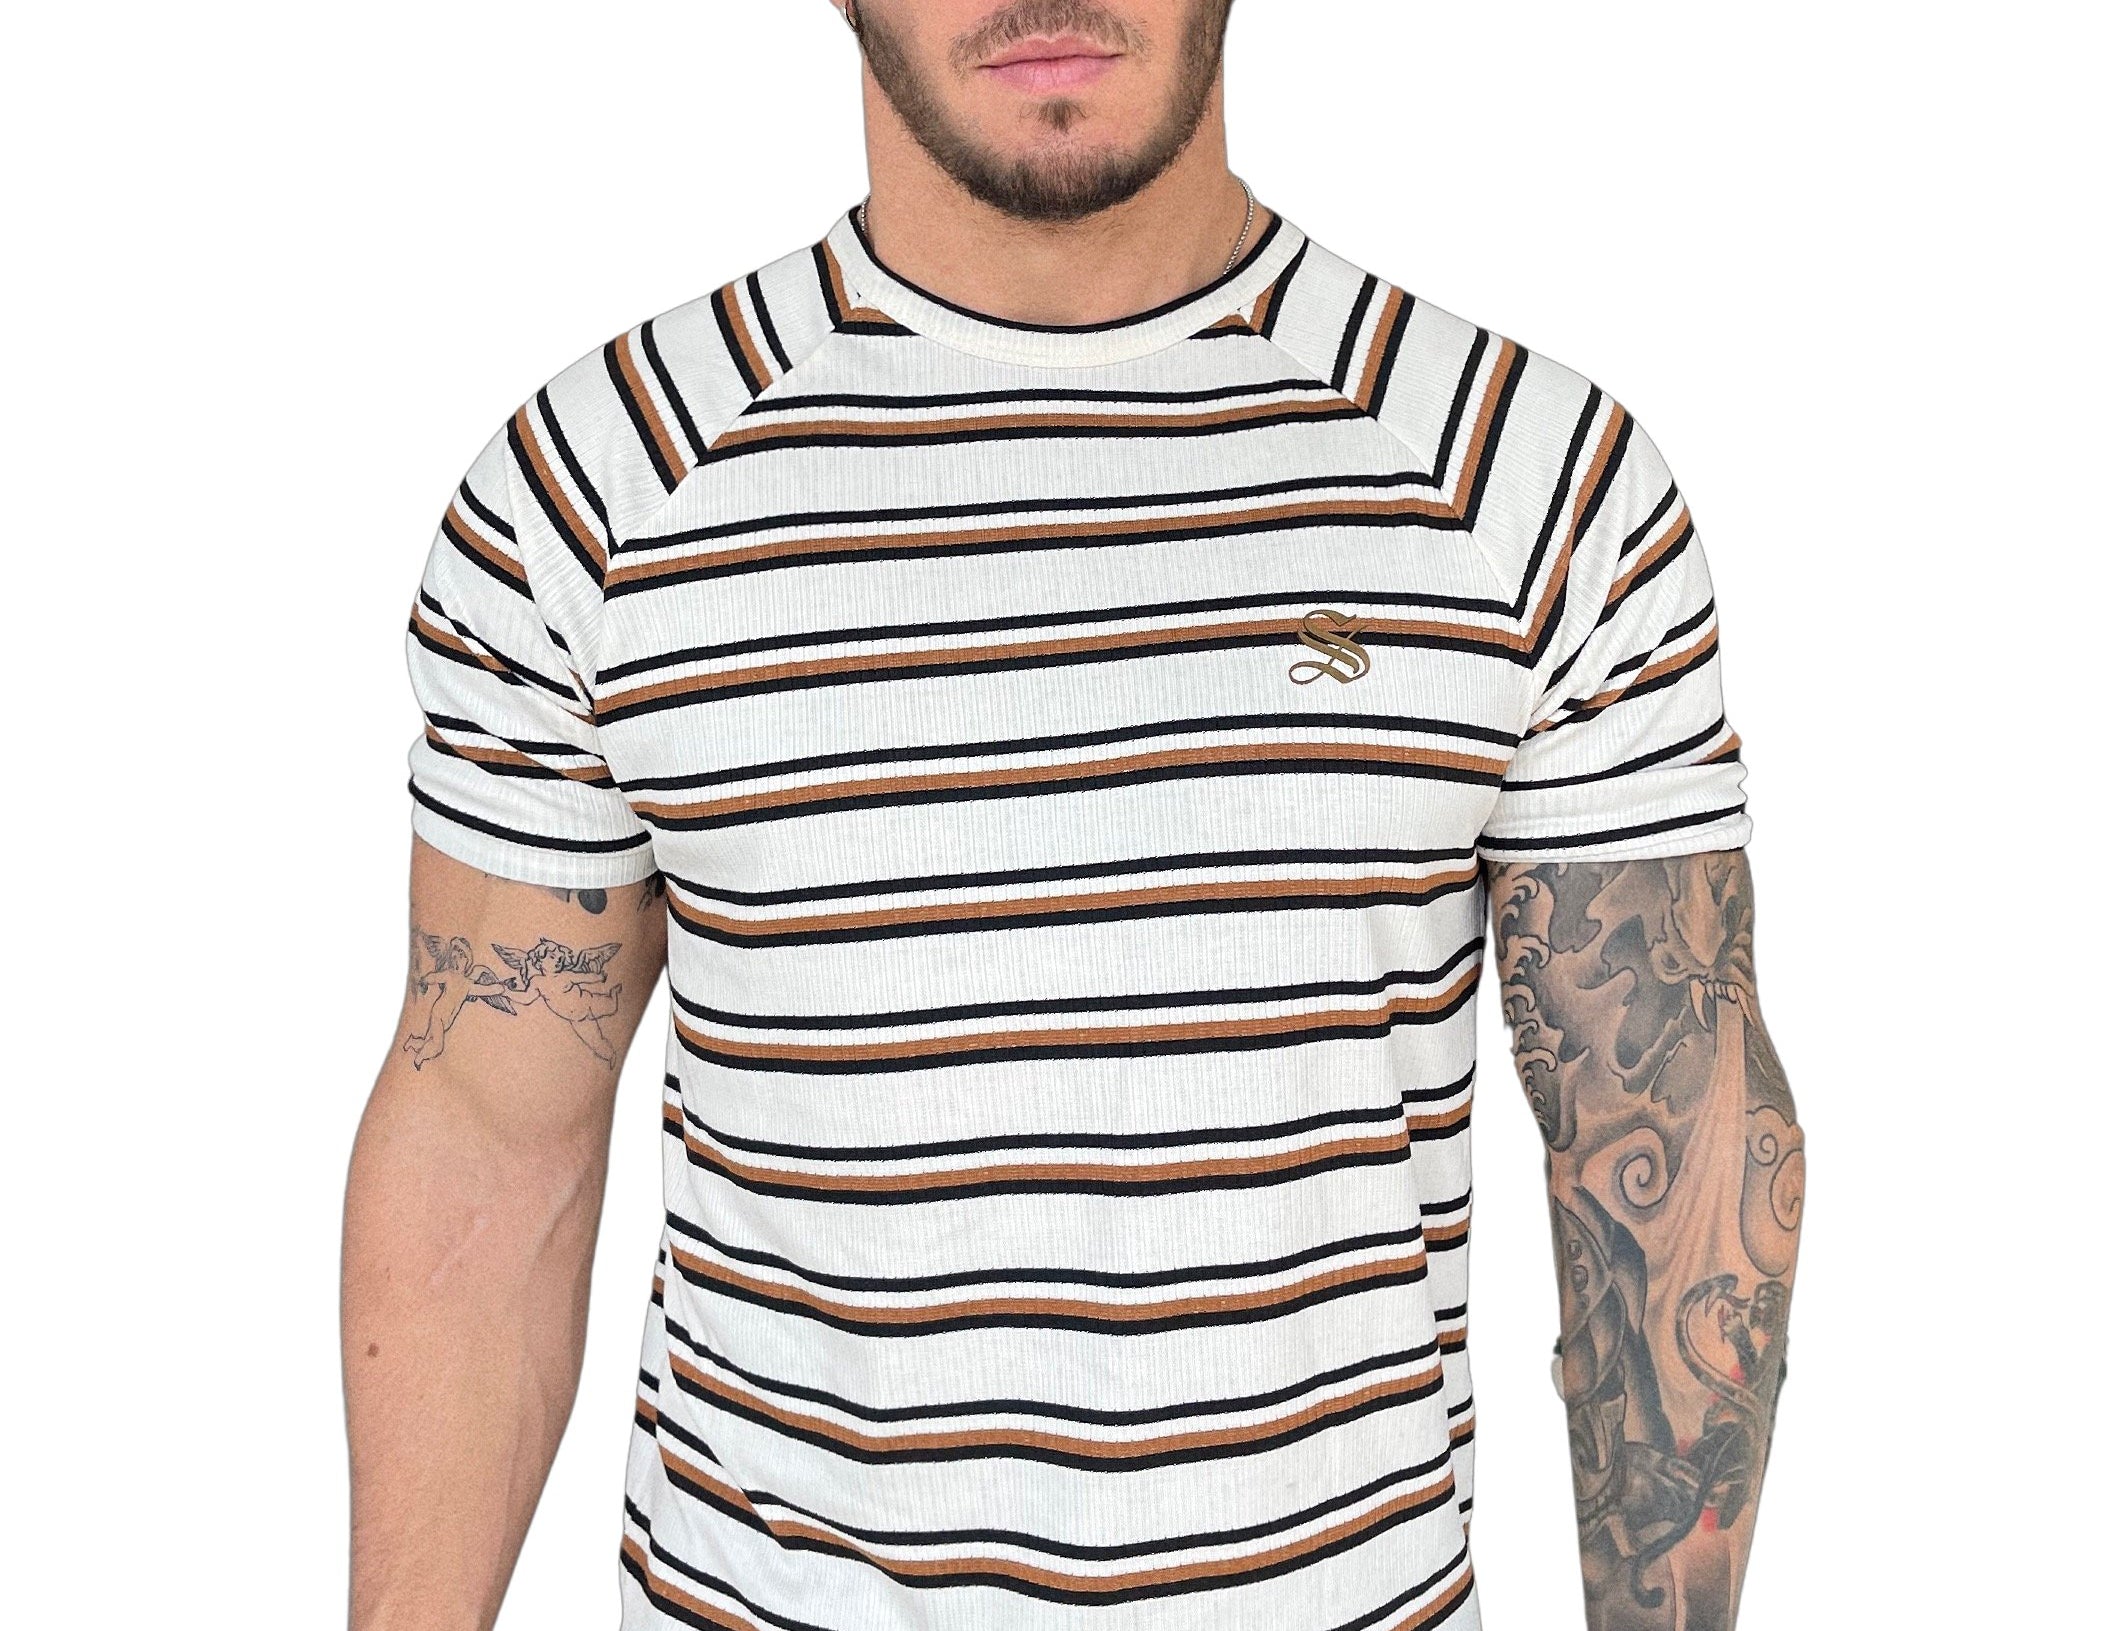 Tcharek Plorby - White T-shirt for Men - Sarman Fashion - Wholesale Clothing Fashion Brand for Men from Canada